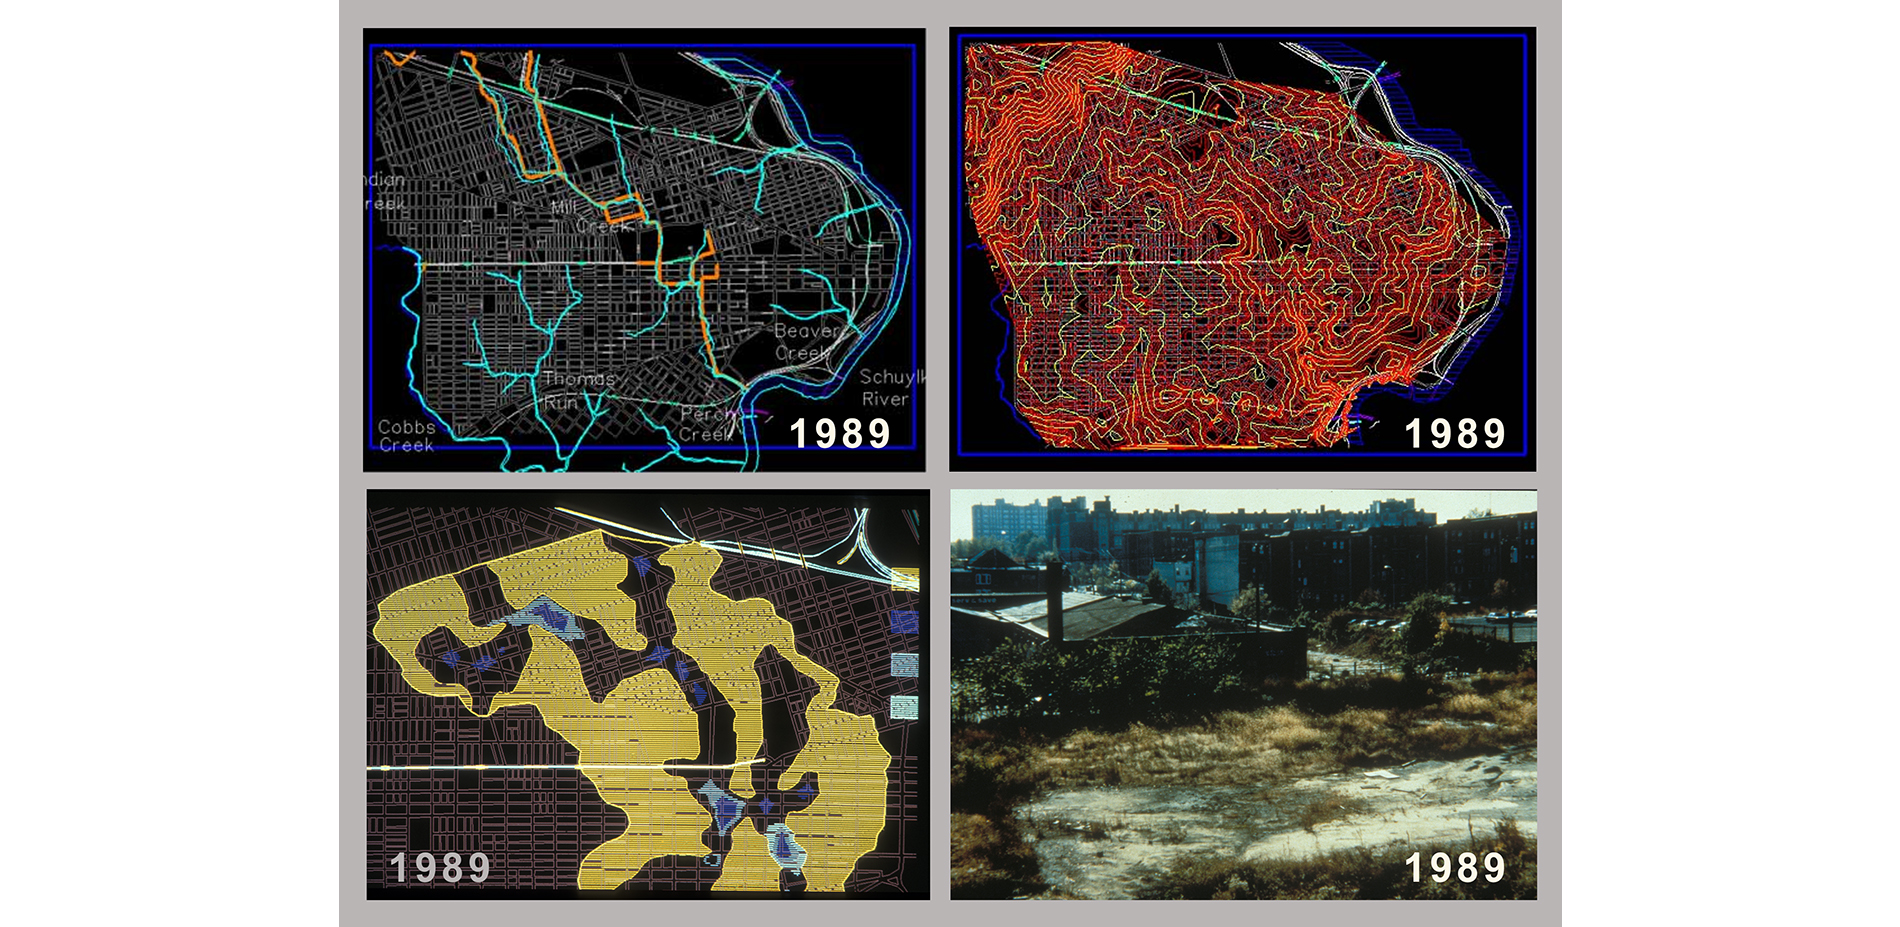 Mapping the Buried Floodplain (1989)